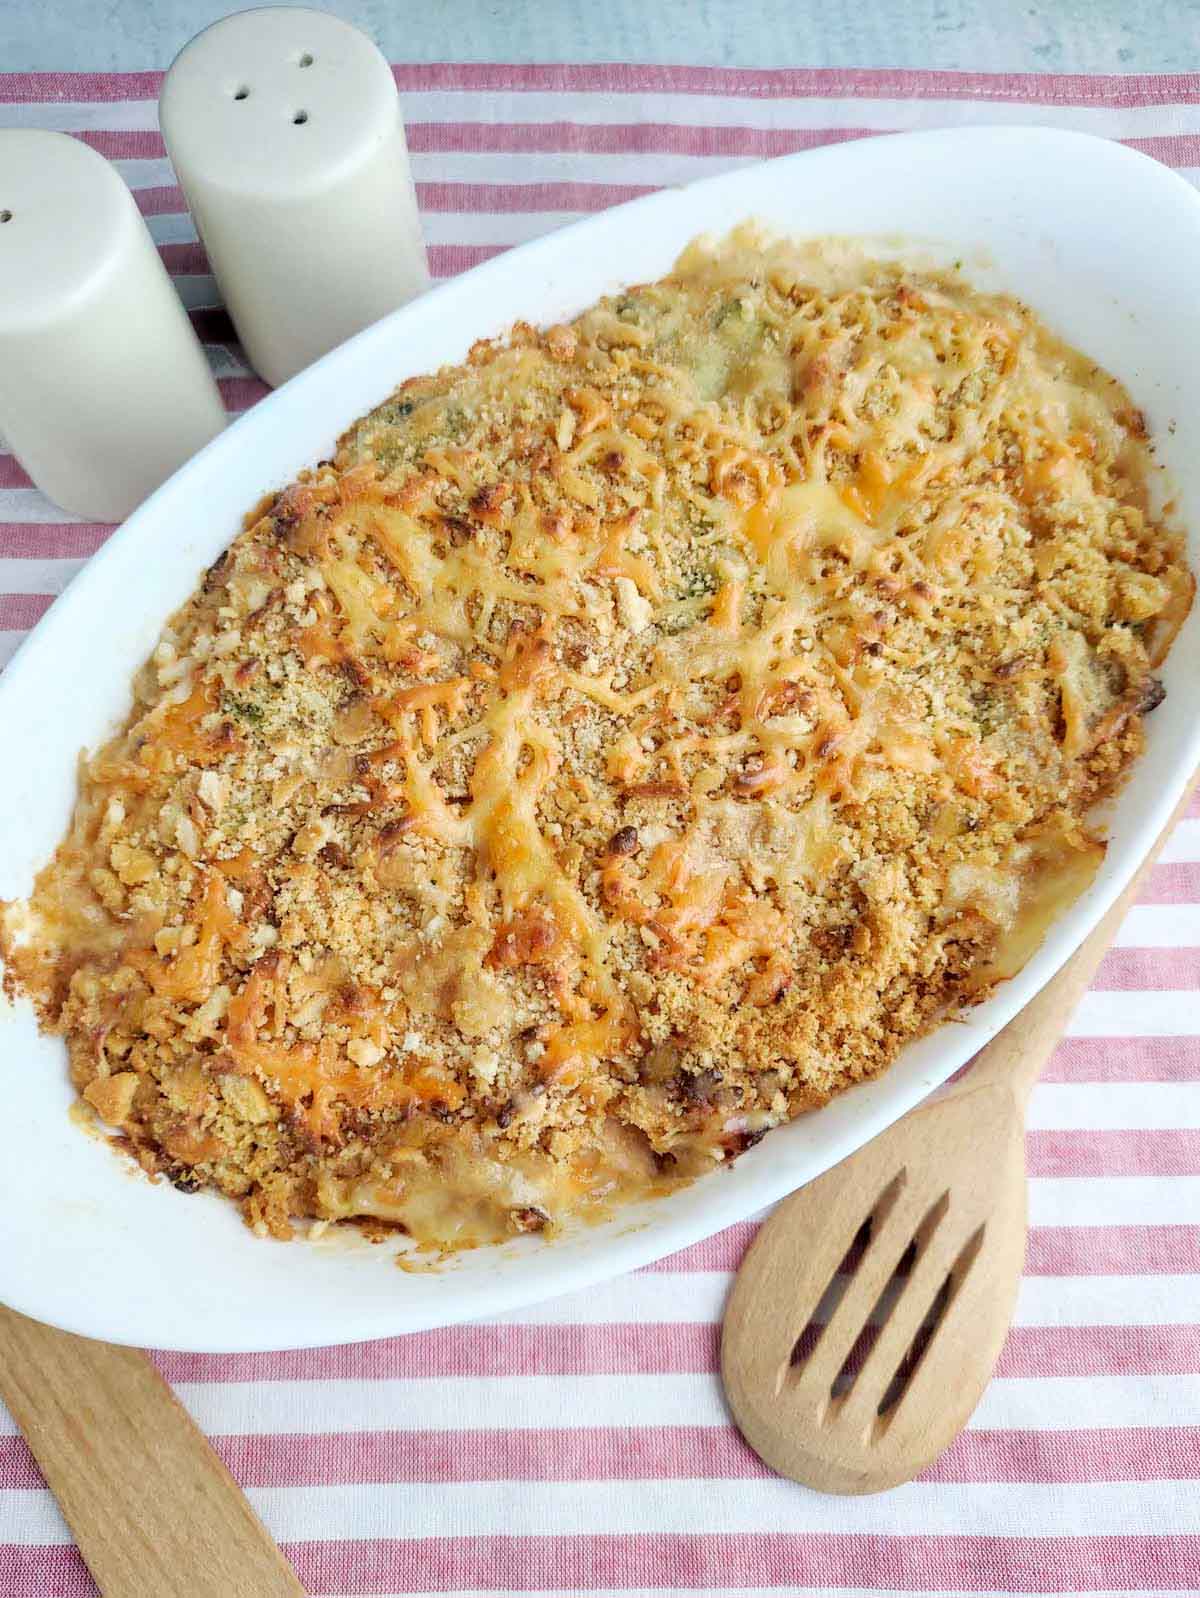 Baked casserole in a baking dish.